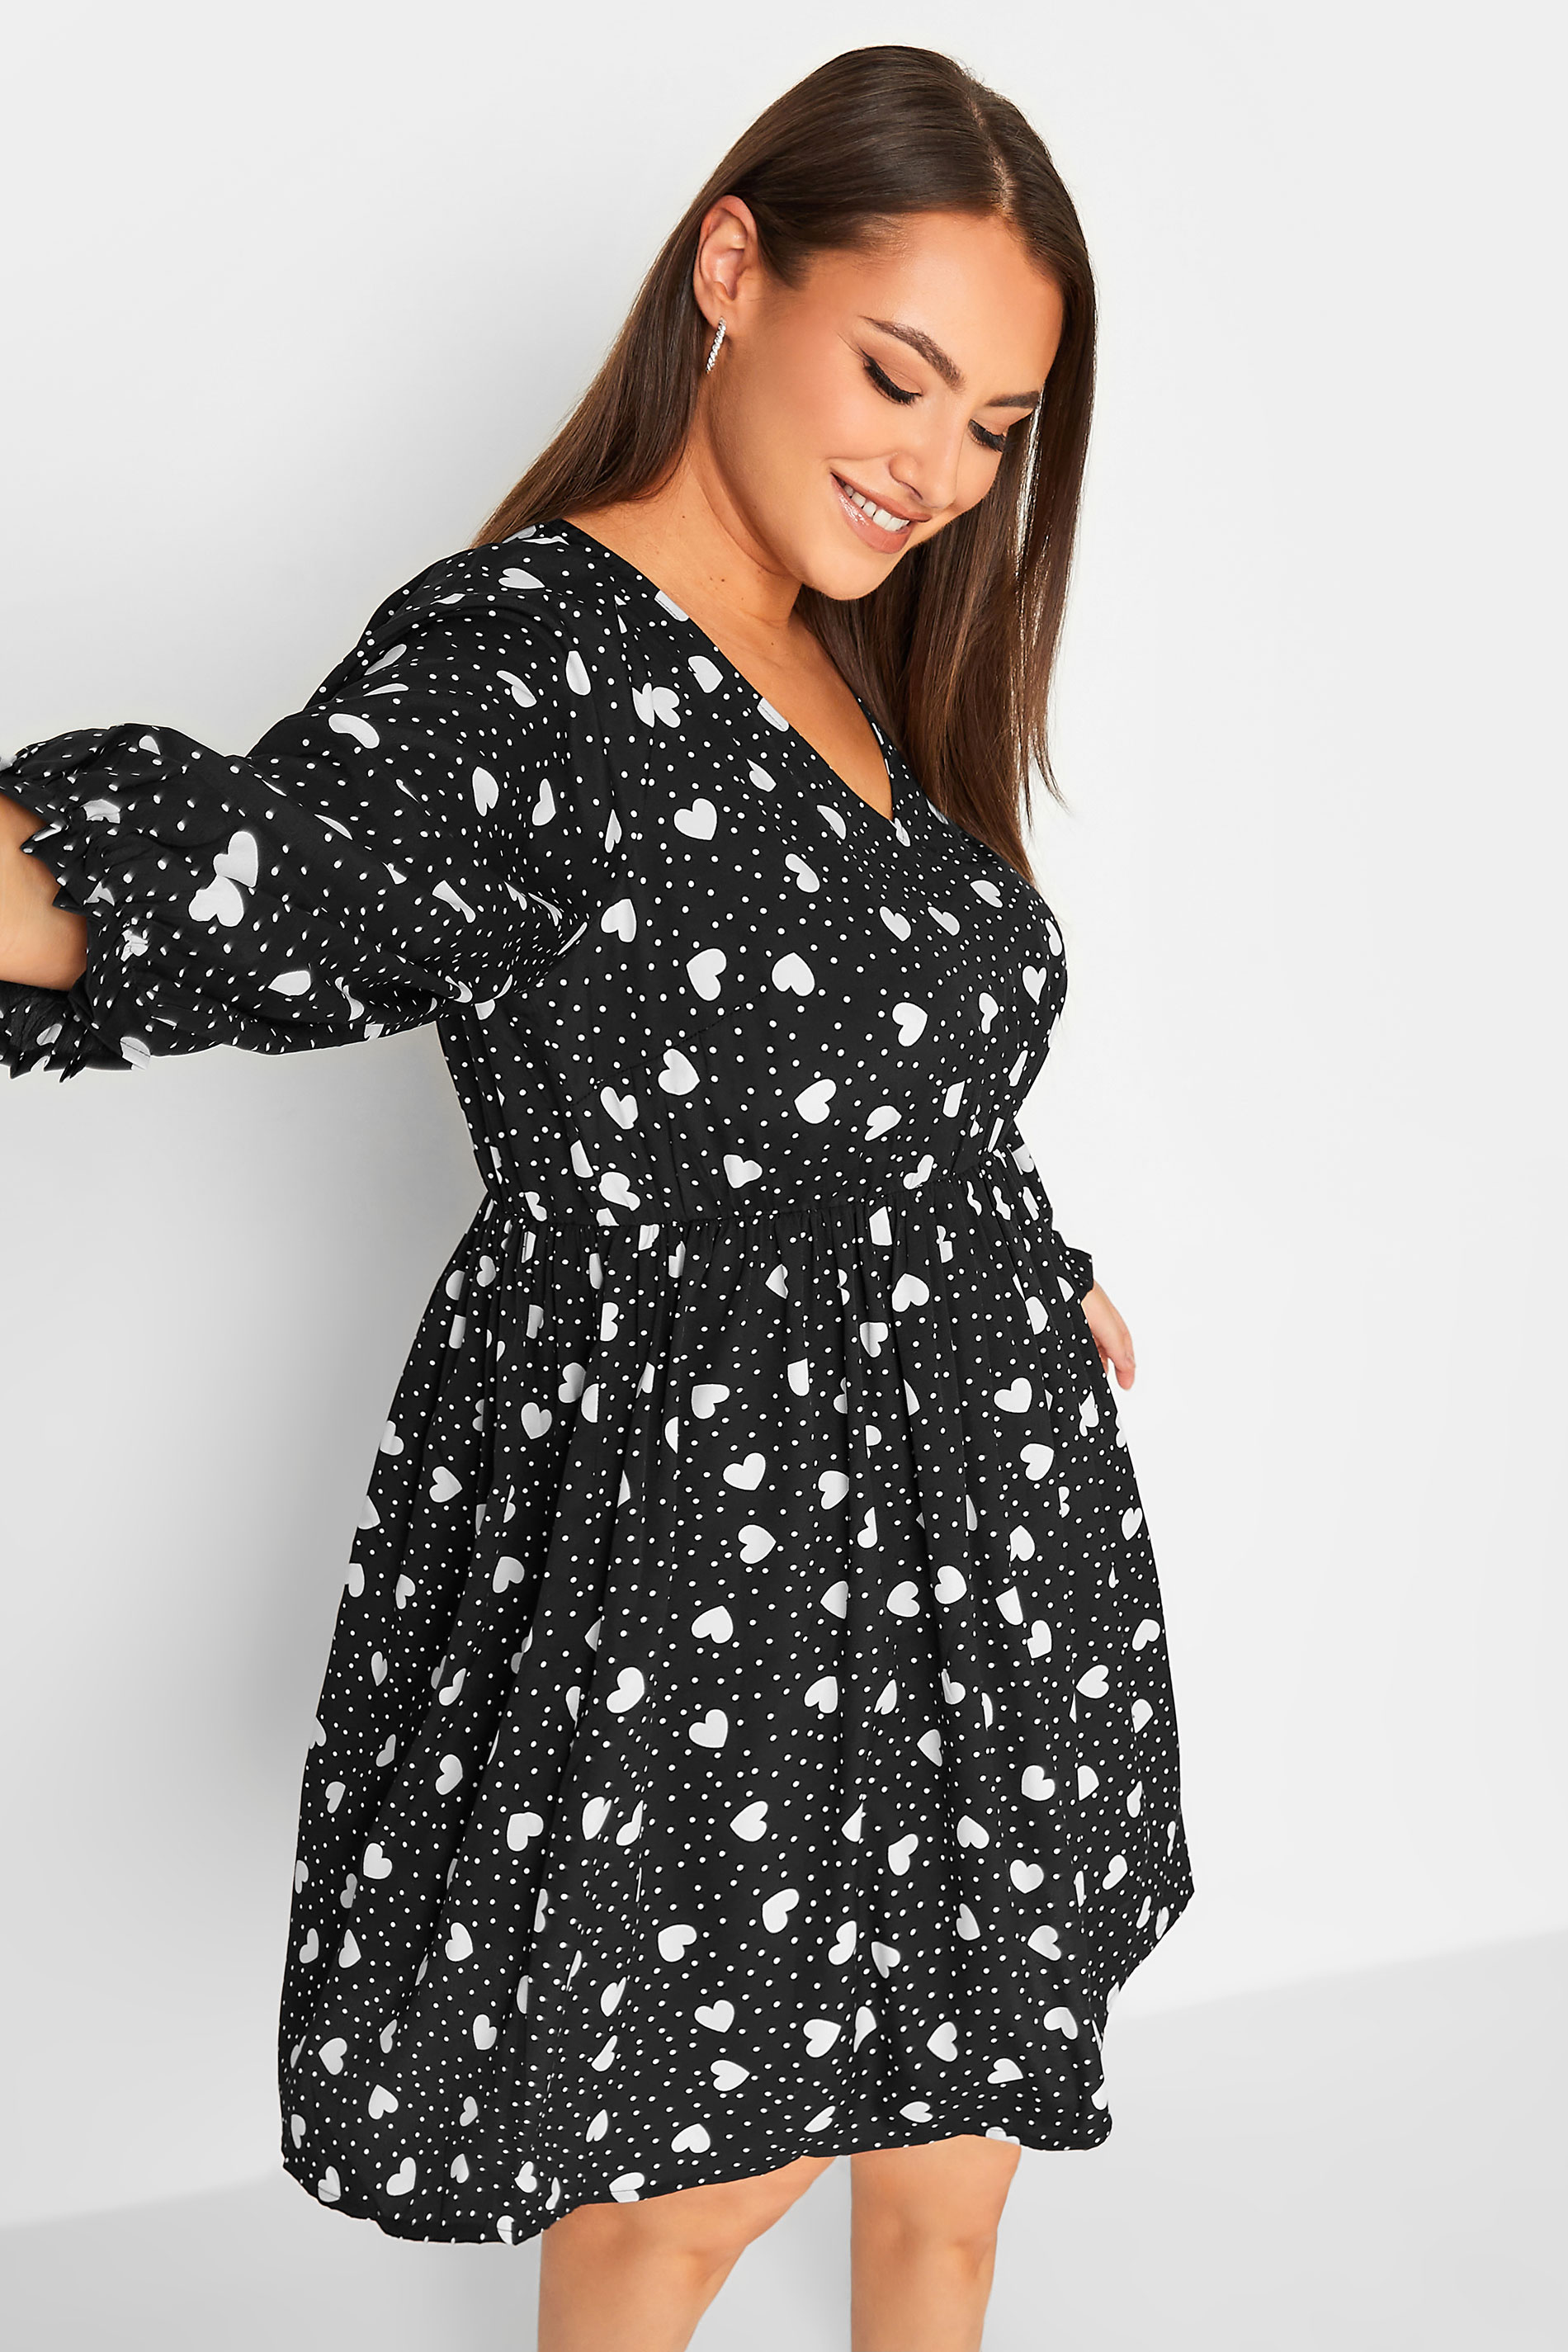 LIMITED COLLECTION Plus Size Black Heart Print Mini Dress | Yours Clothing  1